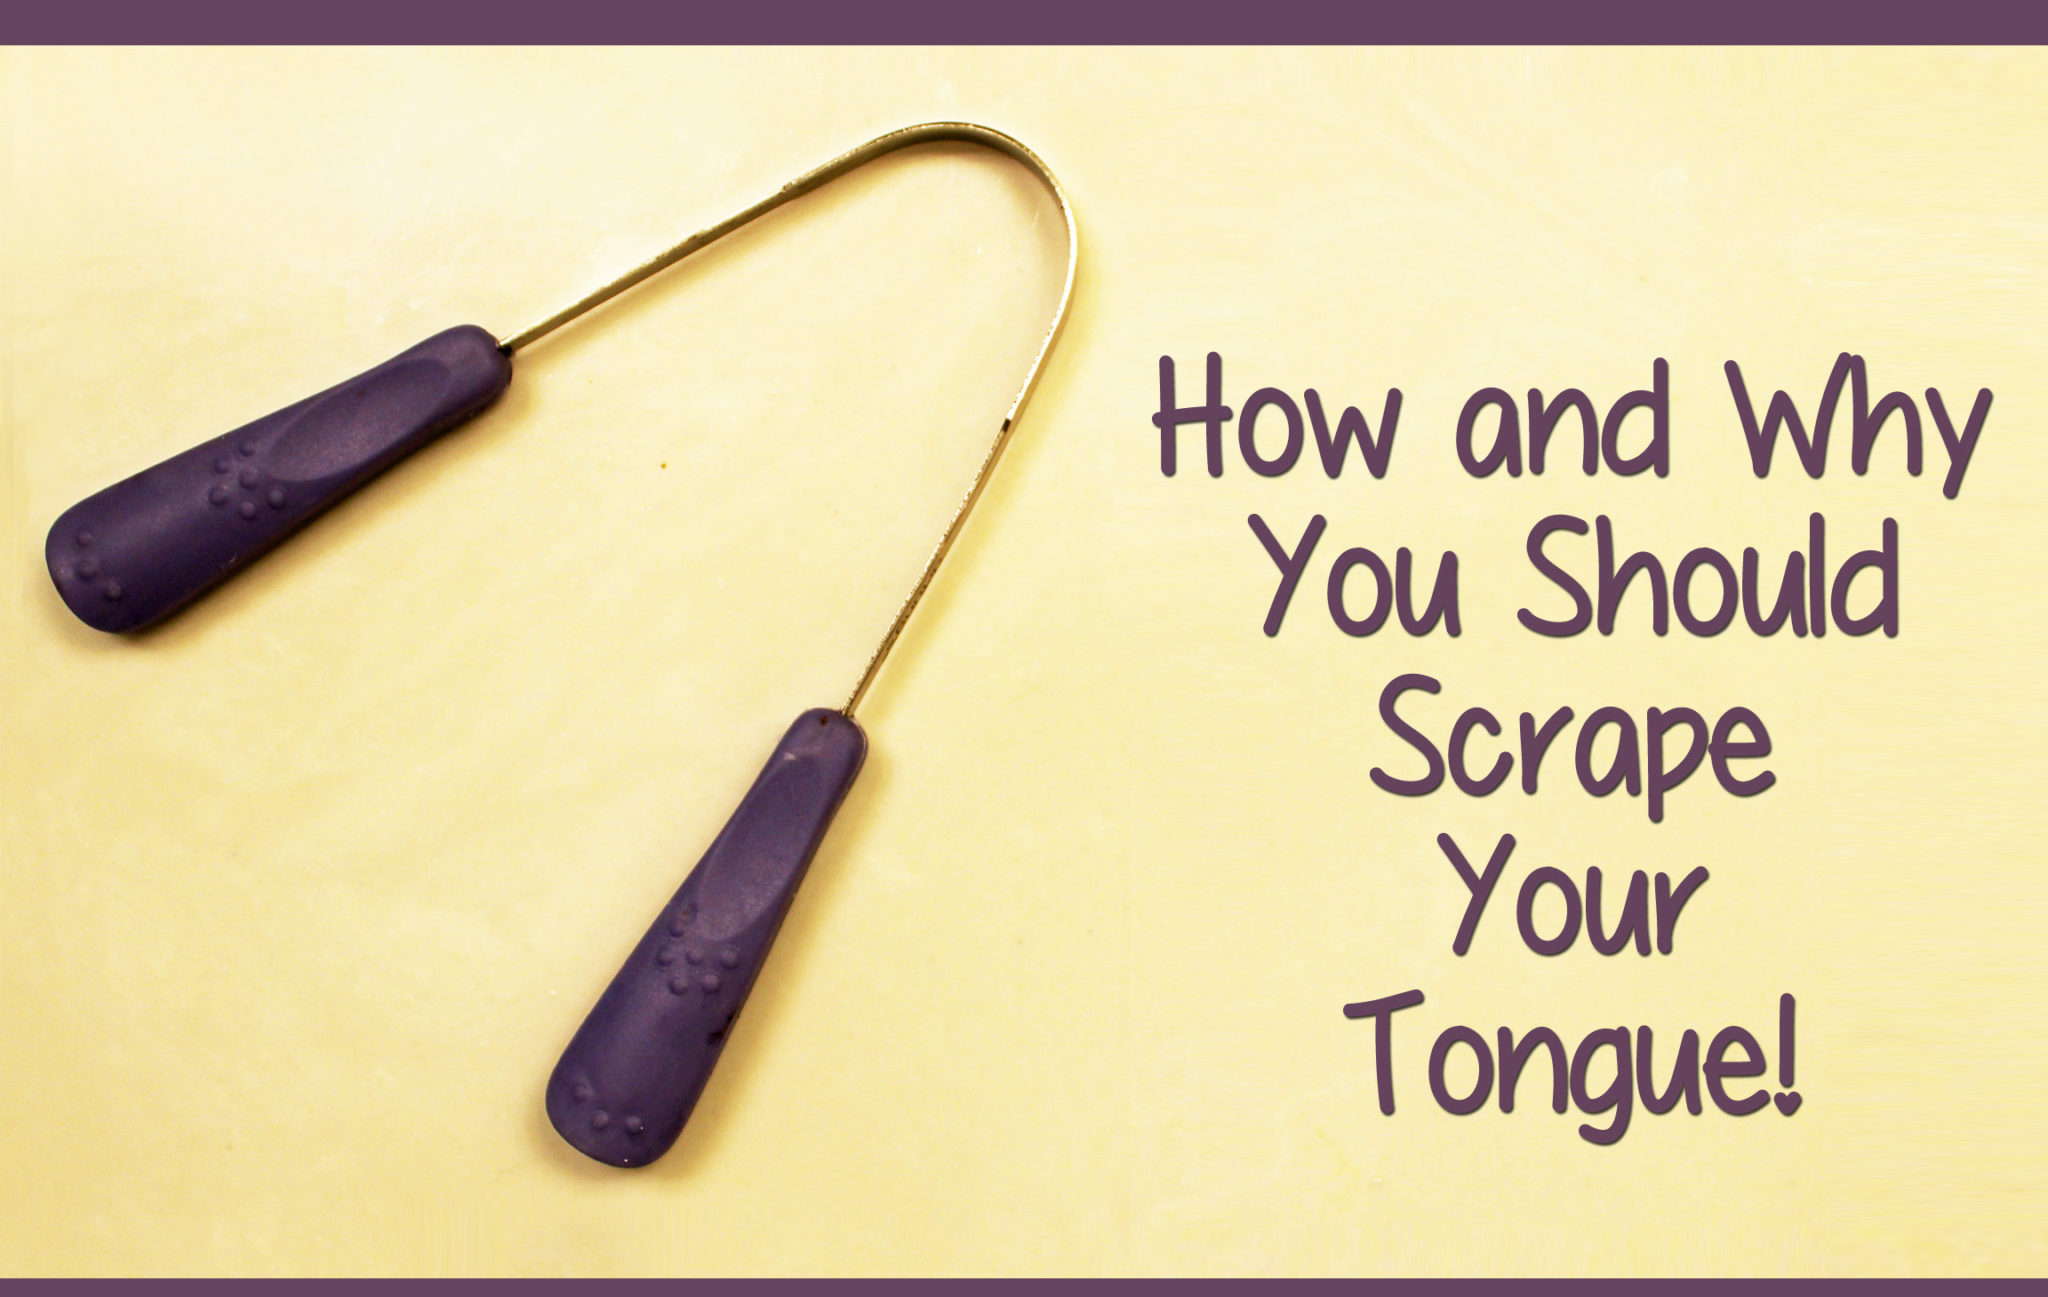 How and Why You Should Scrape Your Tongue